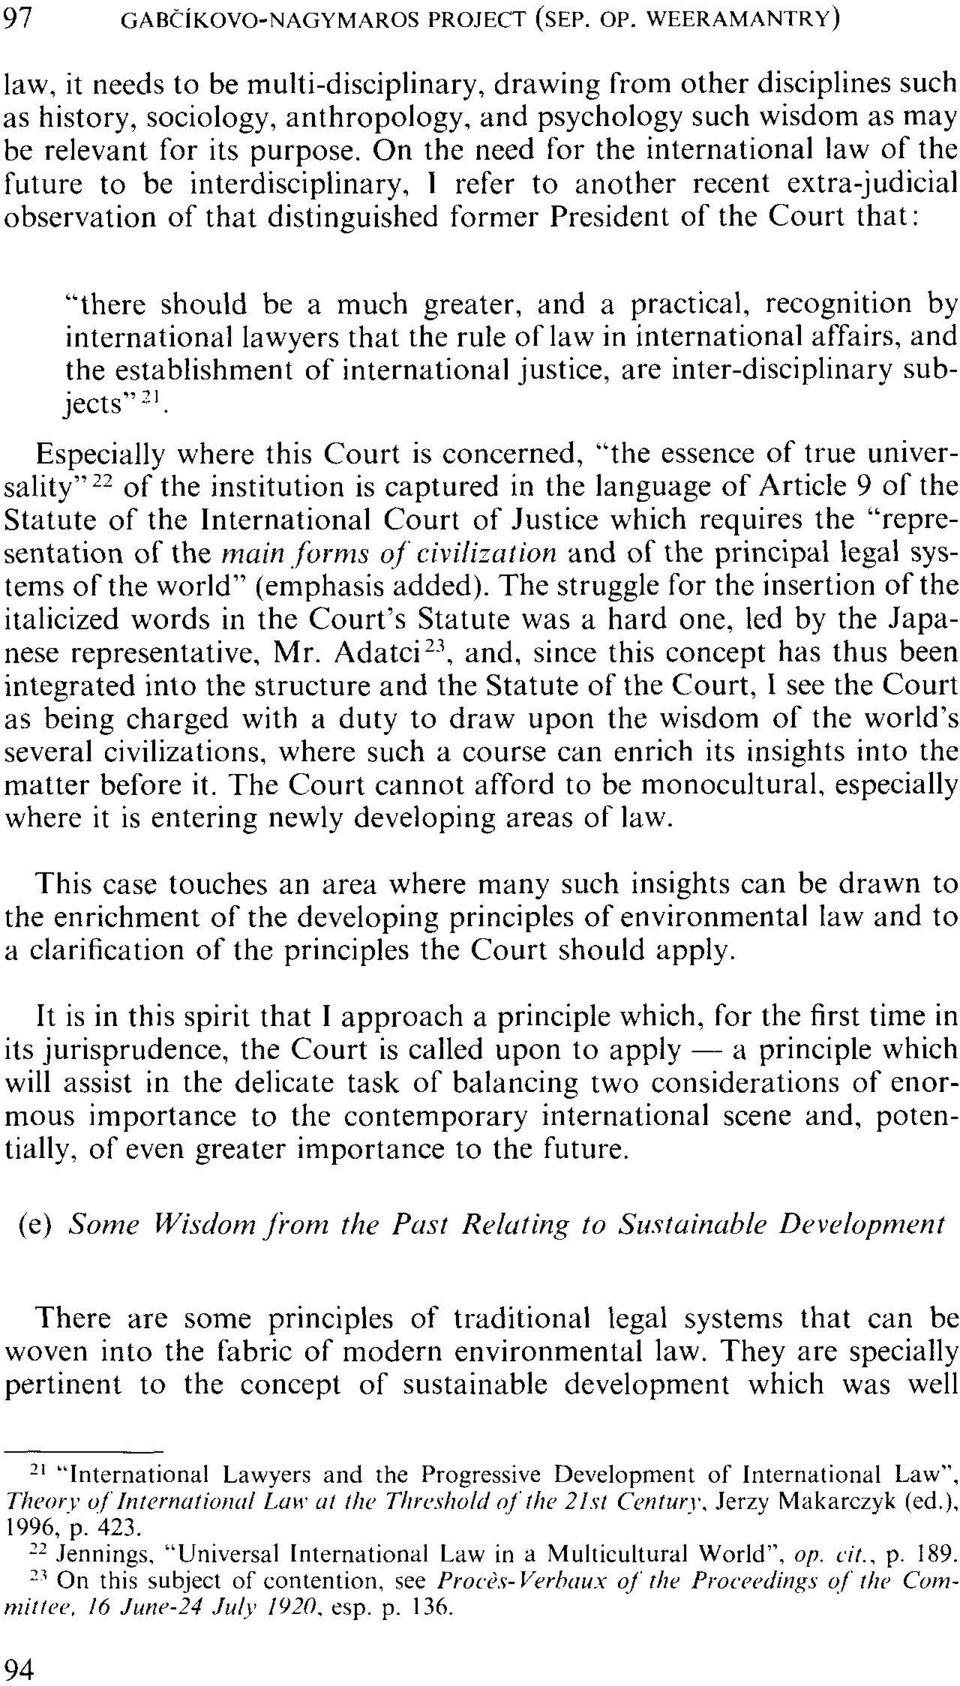 On the need for the international law of the future to be interdisciplinary, 1 refer to another recent extra-judicial observation of that distinguished former President of the Court that: "there